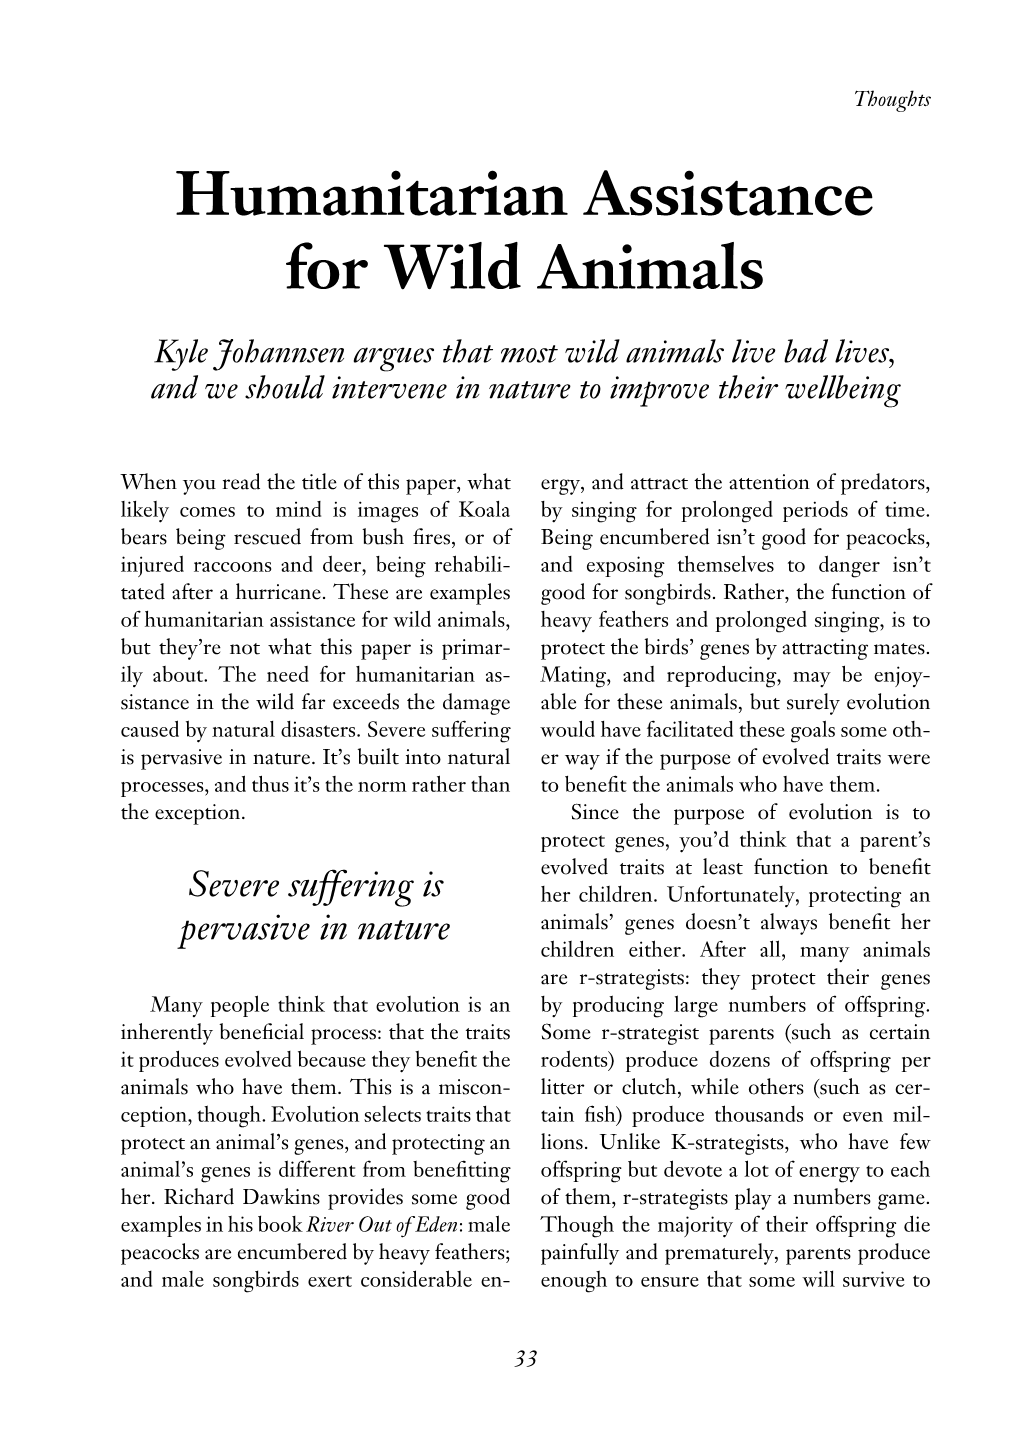 Humanitarian Assistance for Wild Animals